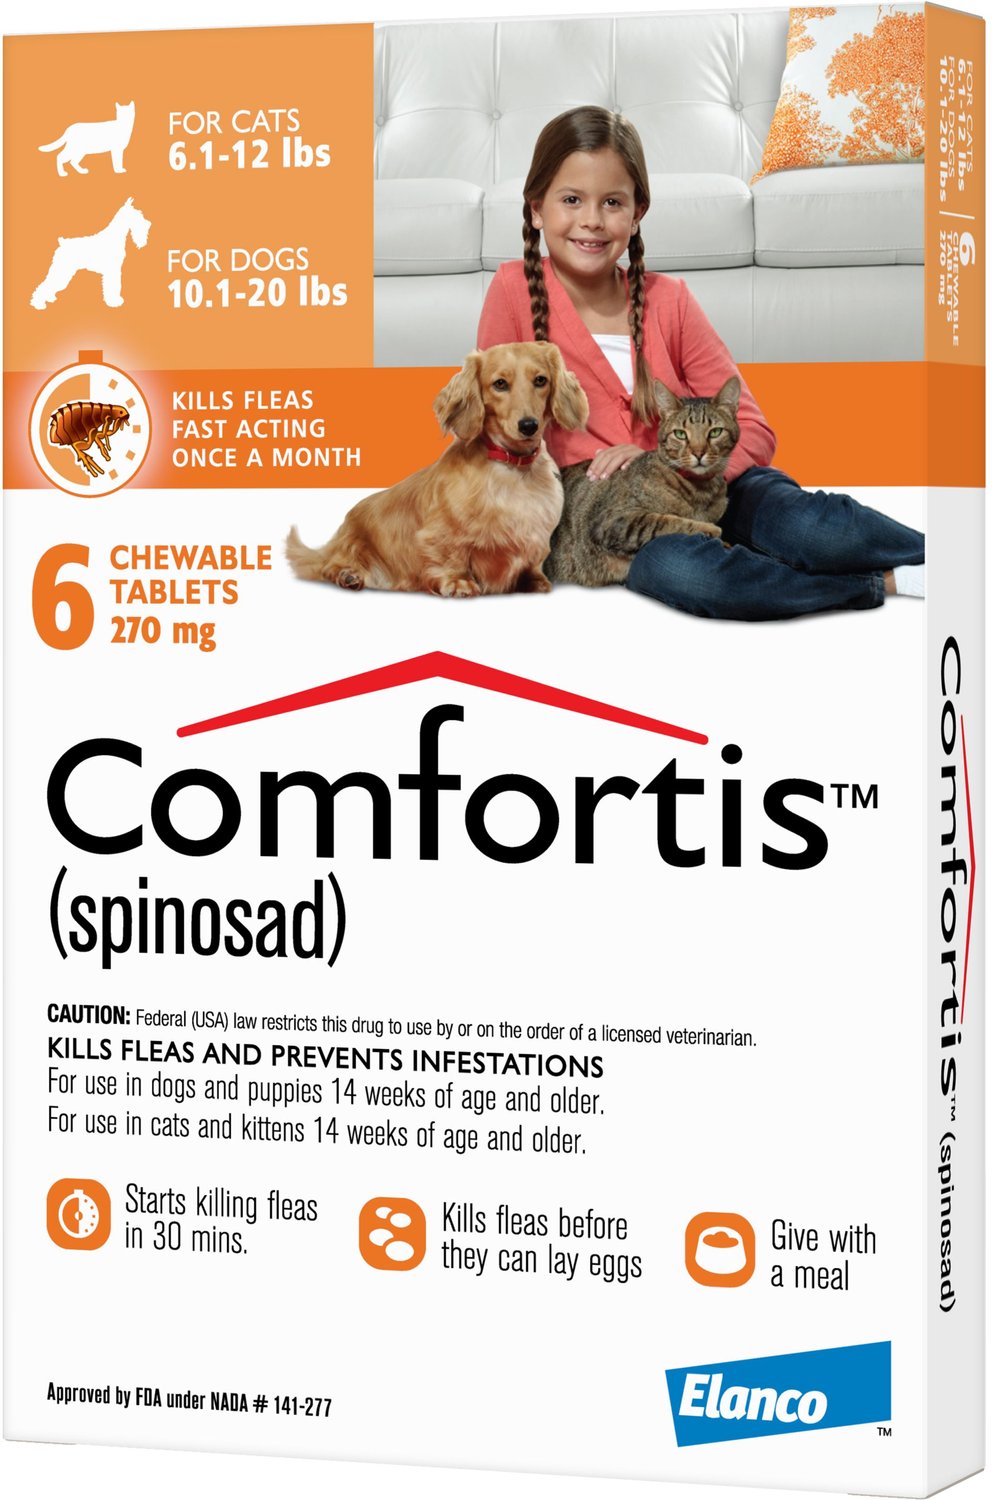 cheap comfortis plus for dogs